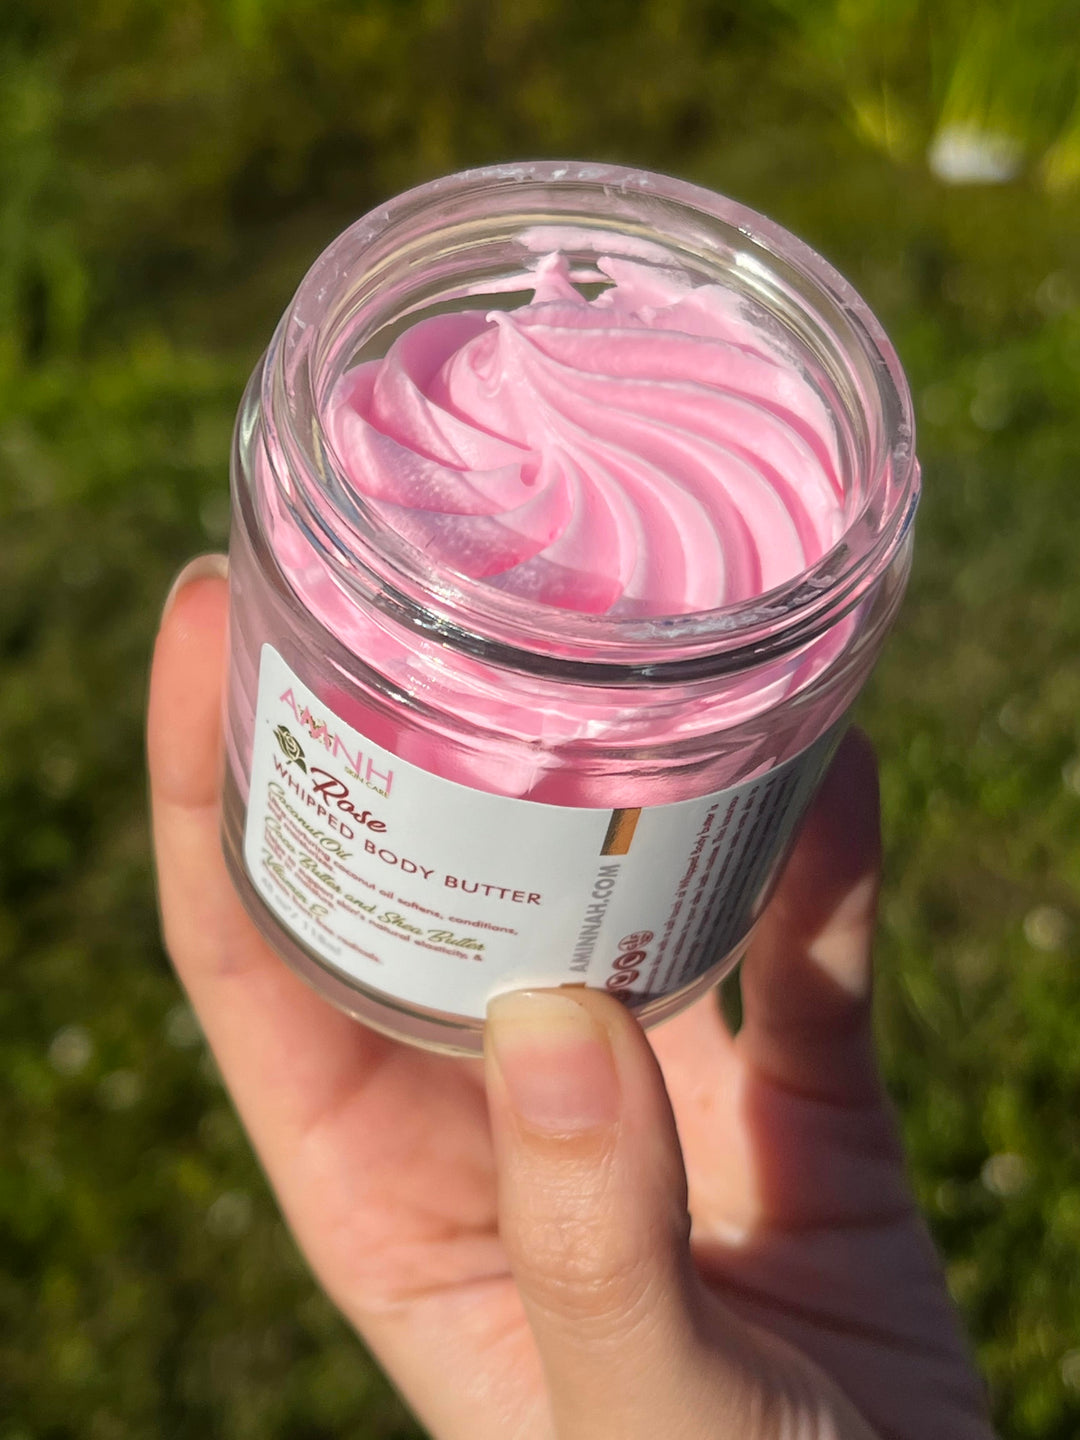 "Rose" Whipped Body Butter